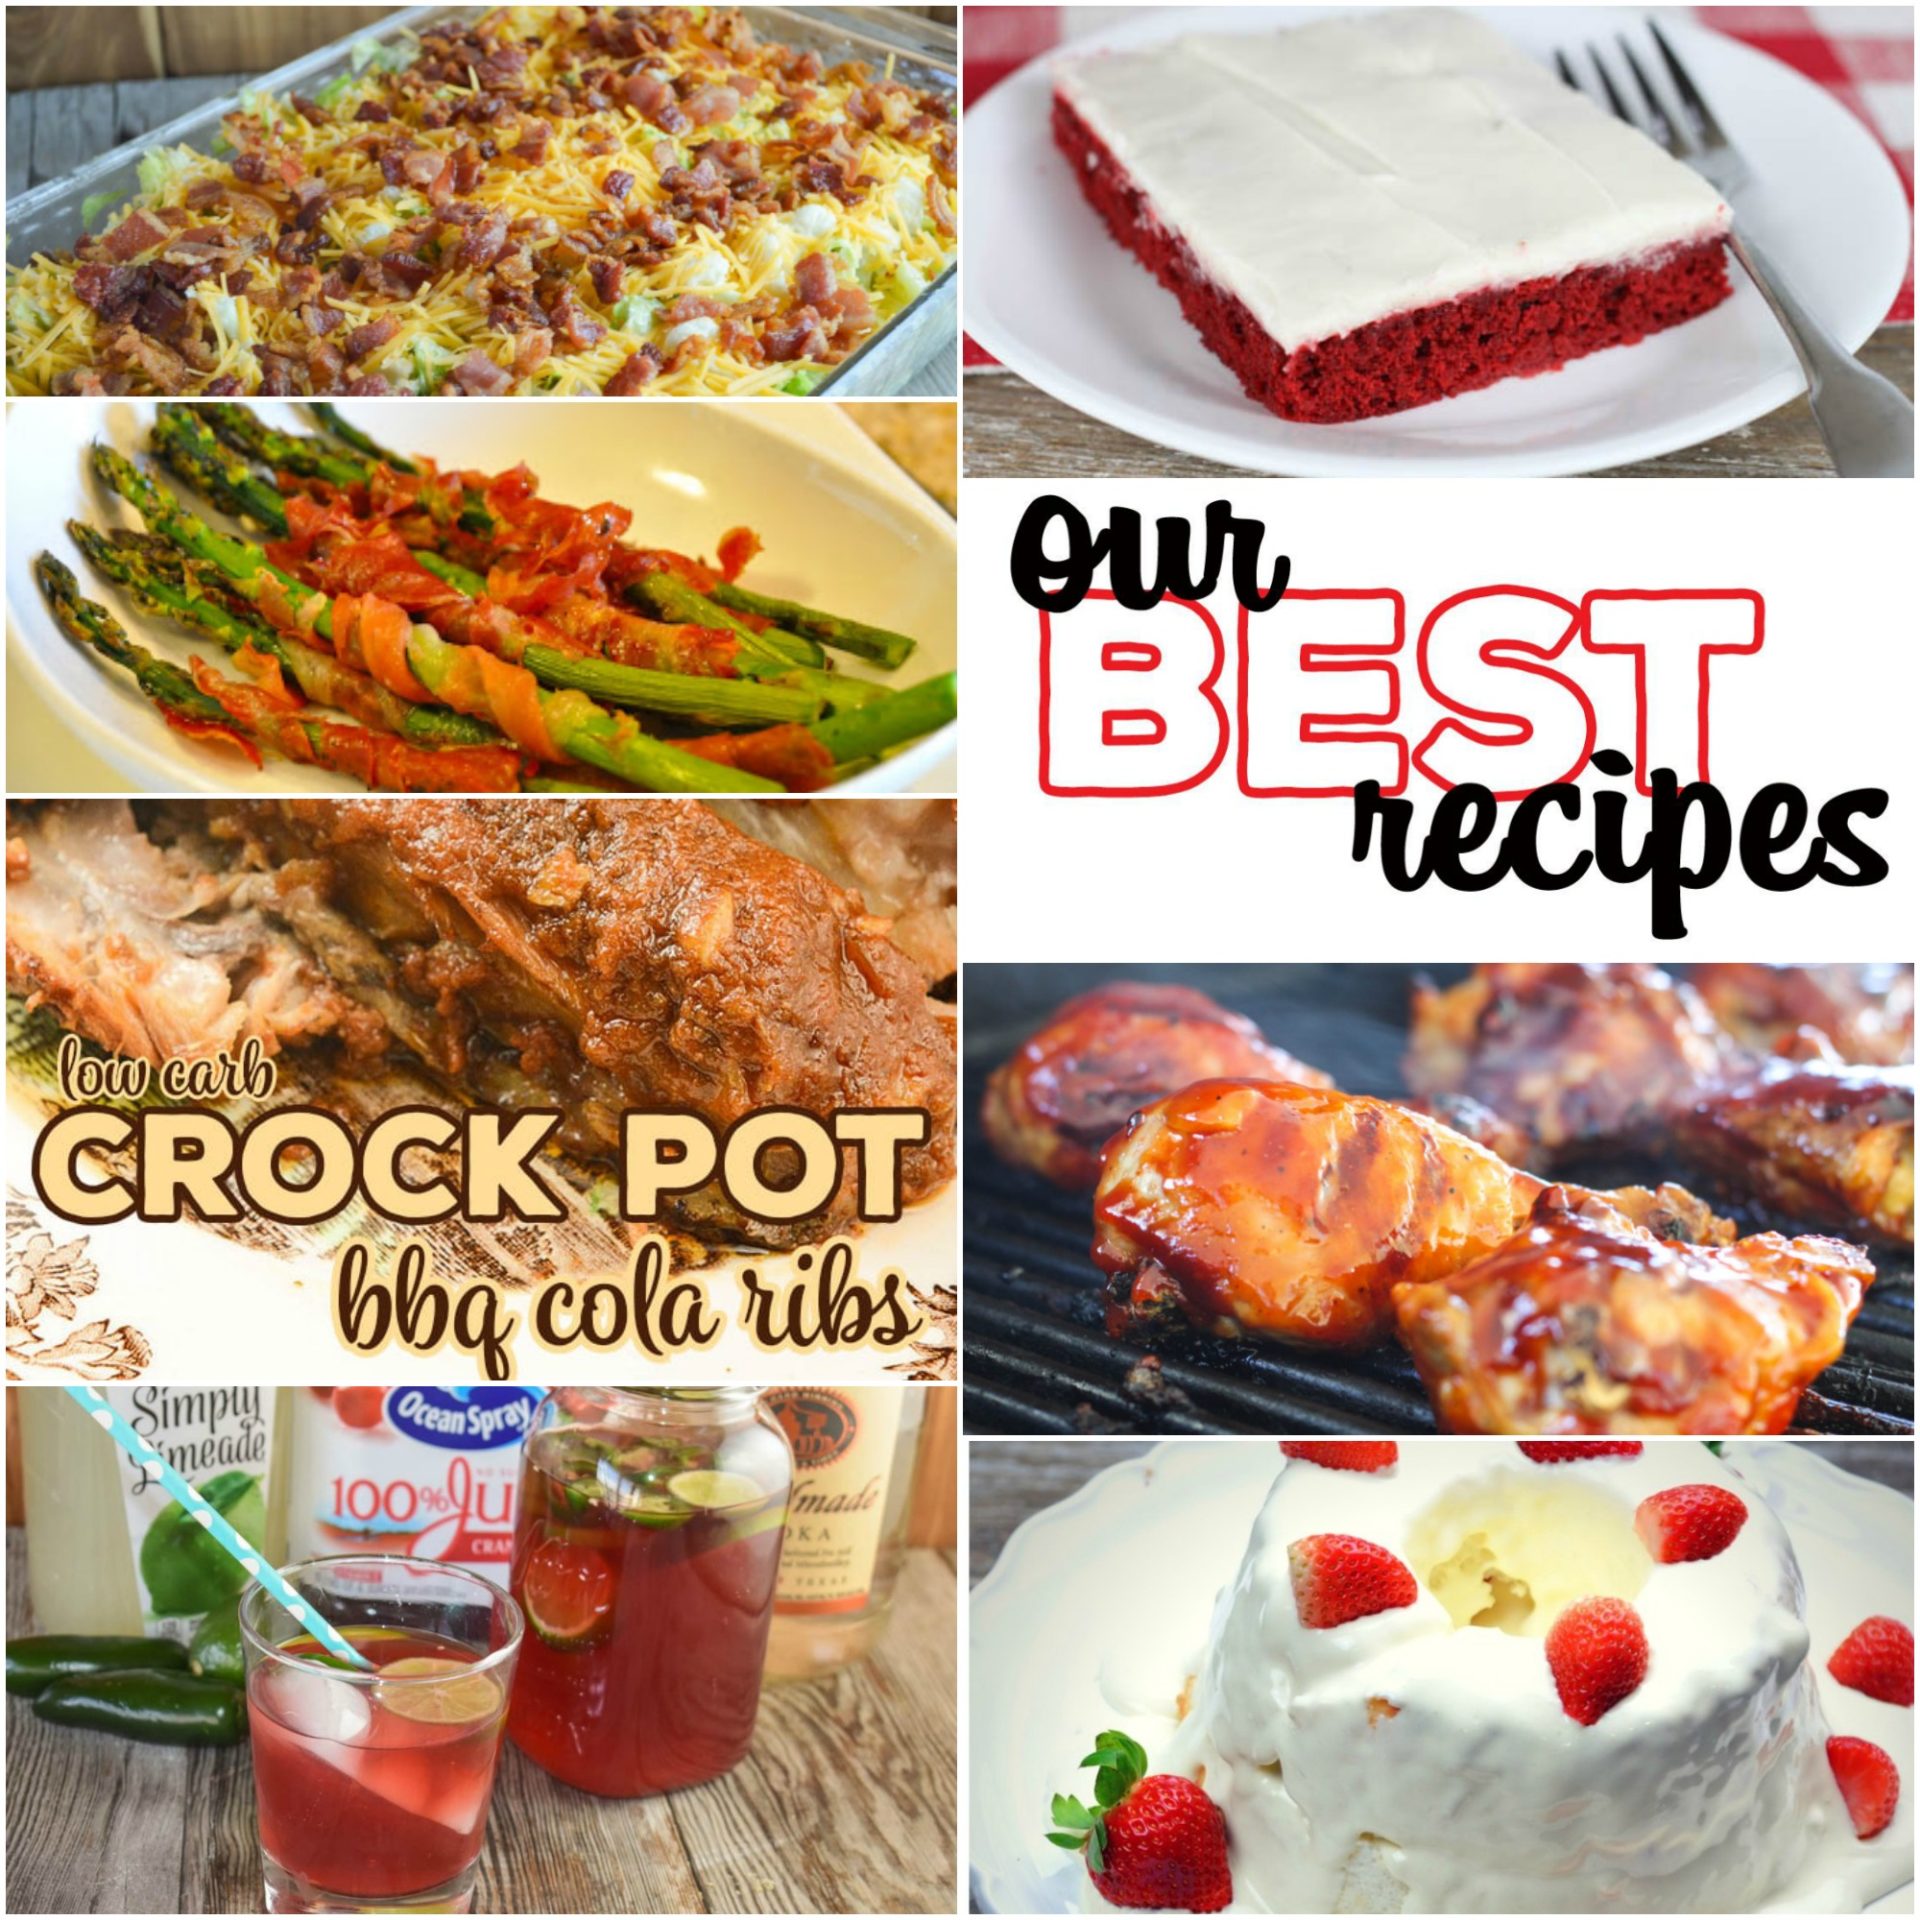 Memorial Day Recipes (Our Best Recipes)